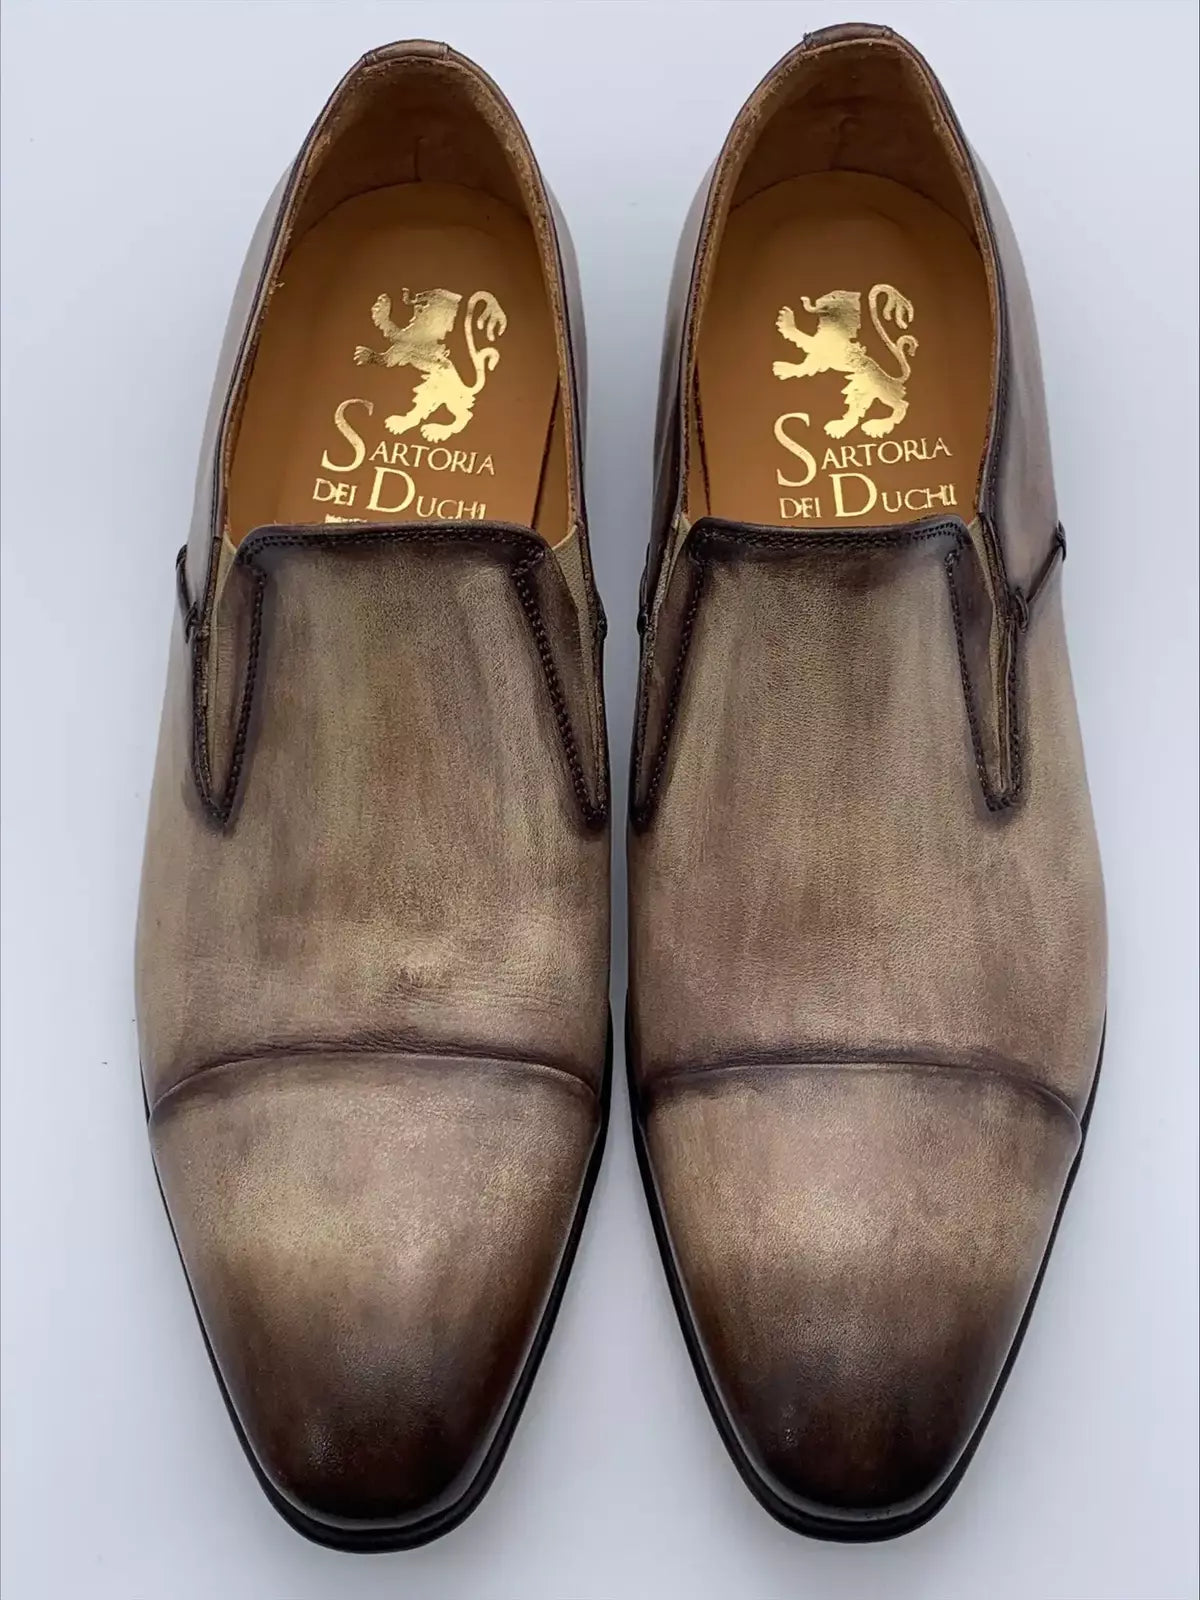 Moccasin in leather velour crust colored and antiqued by hand, sand and tobacco color, with light calfskin interior. In Blake processing the shoe is mounted on the shape and with a machine called &quot;Blake&quot;, the sole is sewn to the insole and upper. This process guarantees the tightness of the bottom.| Sartoria Dei Duchi - Atri